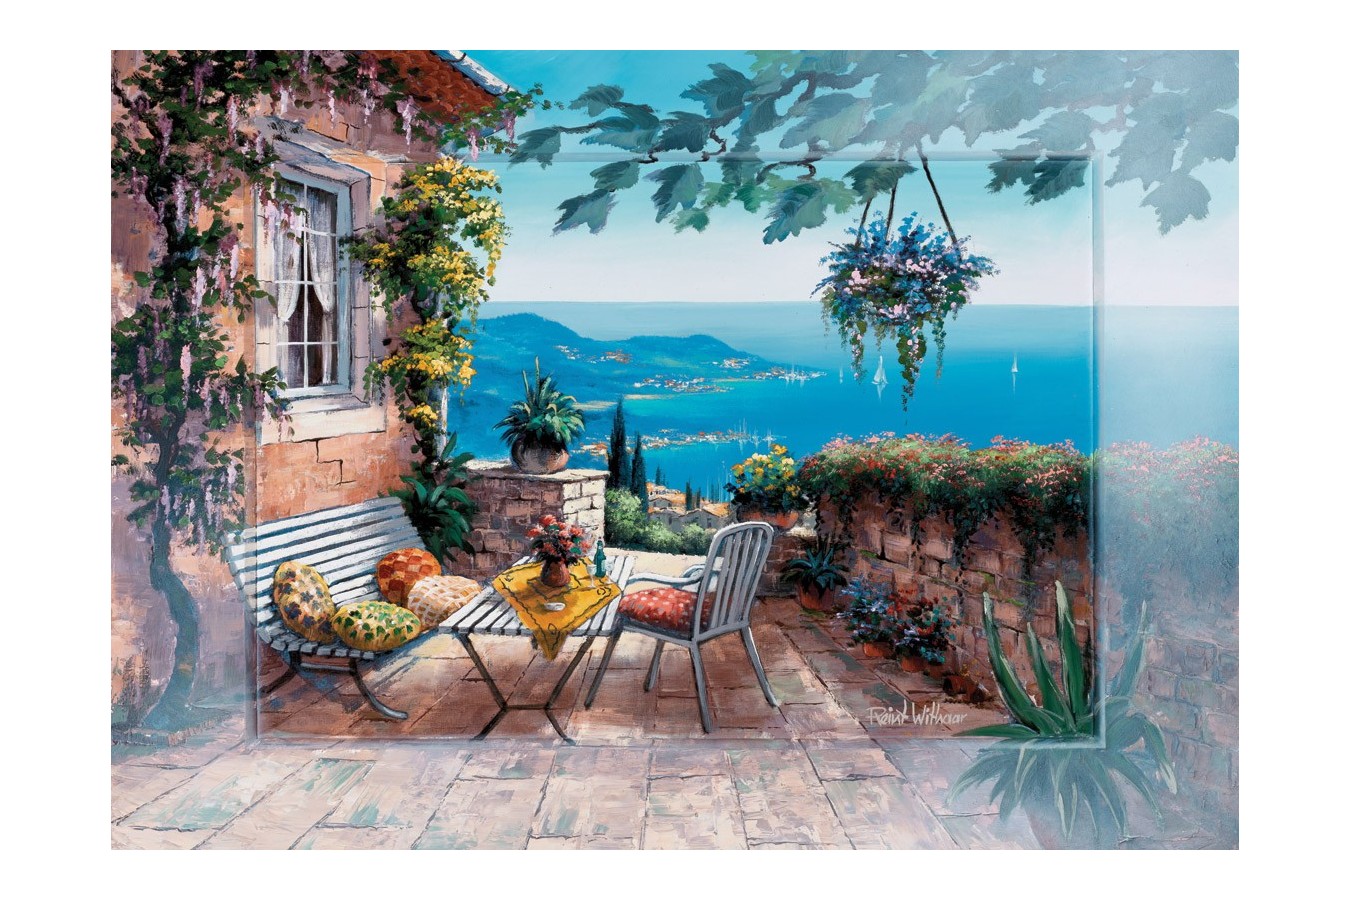 Puzzle Art Puzzle - Times of Tranquillity, 1500 piese (Art-Puzzle-4634)